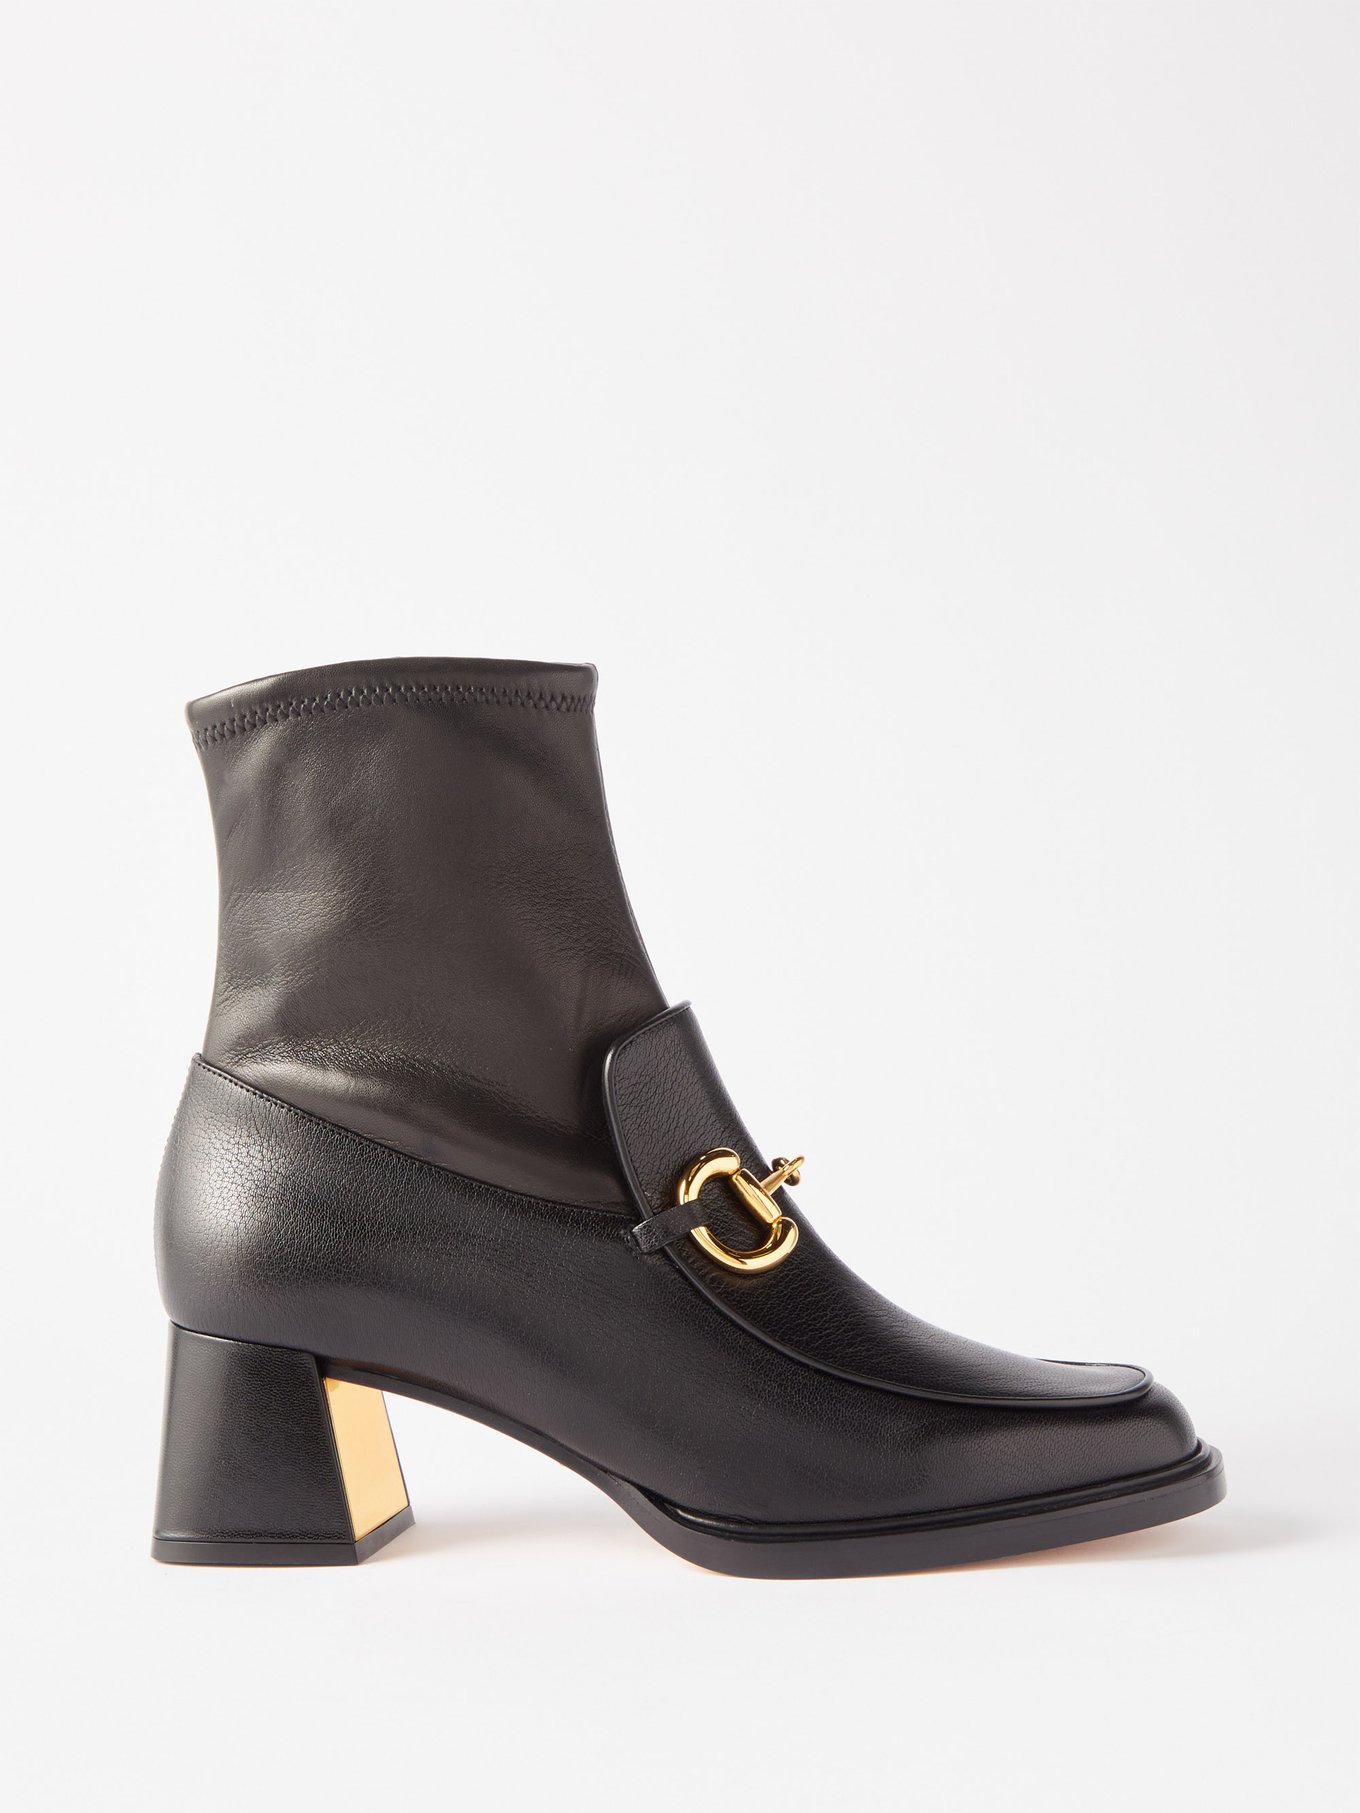 Gucci Marmont Boots